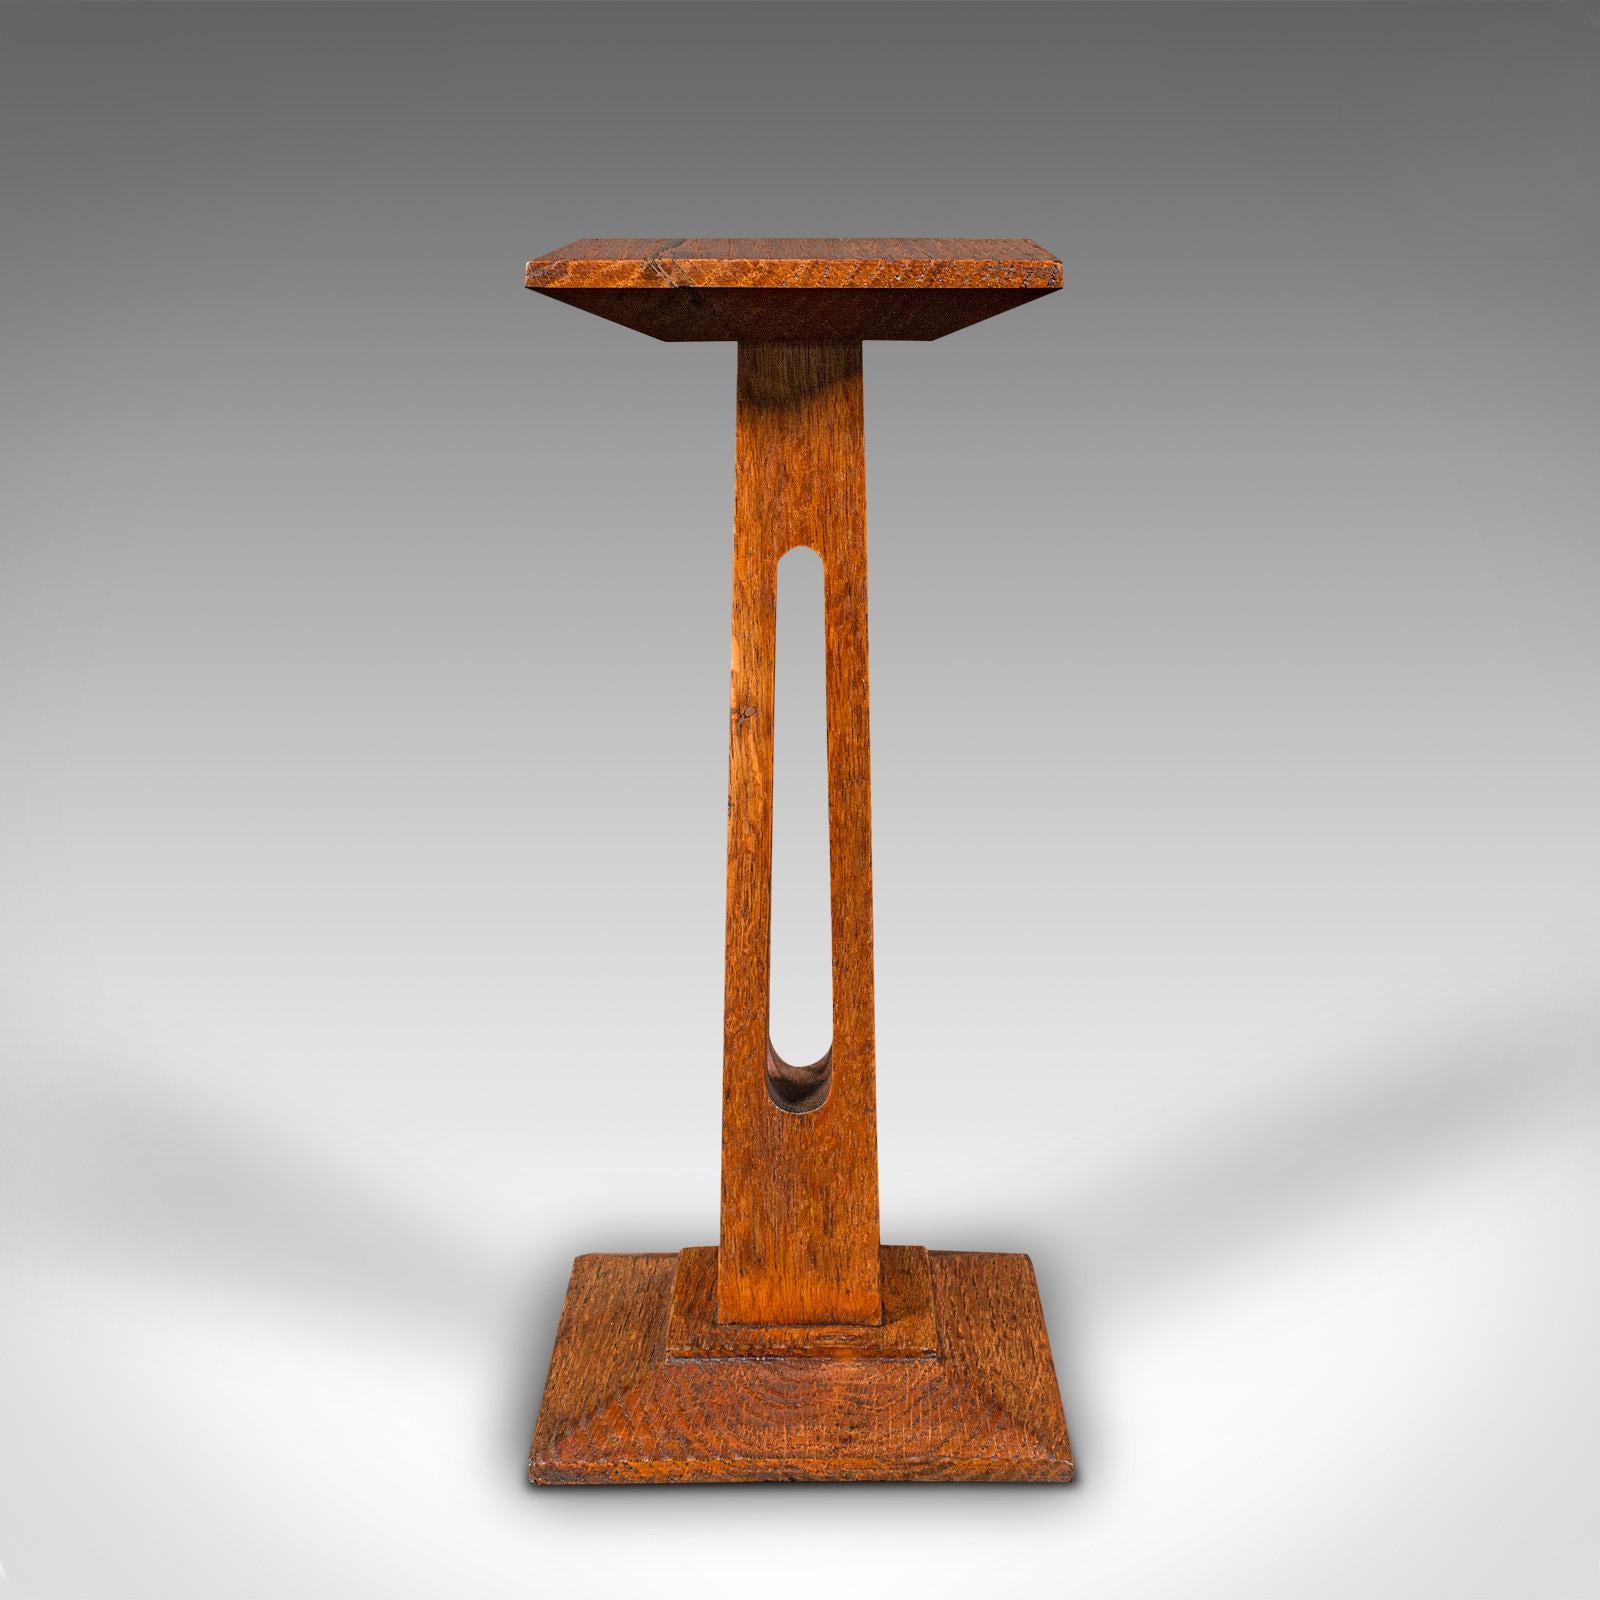 This is a small antique display pedestal. An English, oak jardiniere or bust stand, dating to the late Victorian period, circa 1900.

Appealing Victorian stand, ideal for displaying a small bust or statue
Displaying a desirable aged patina and in